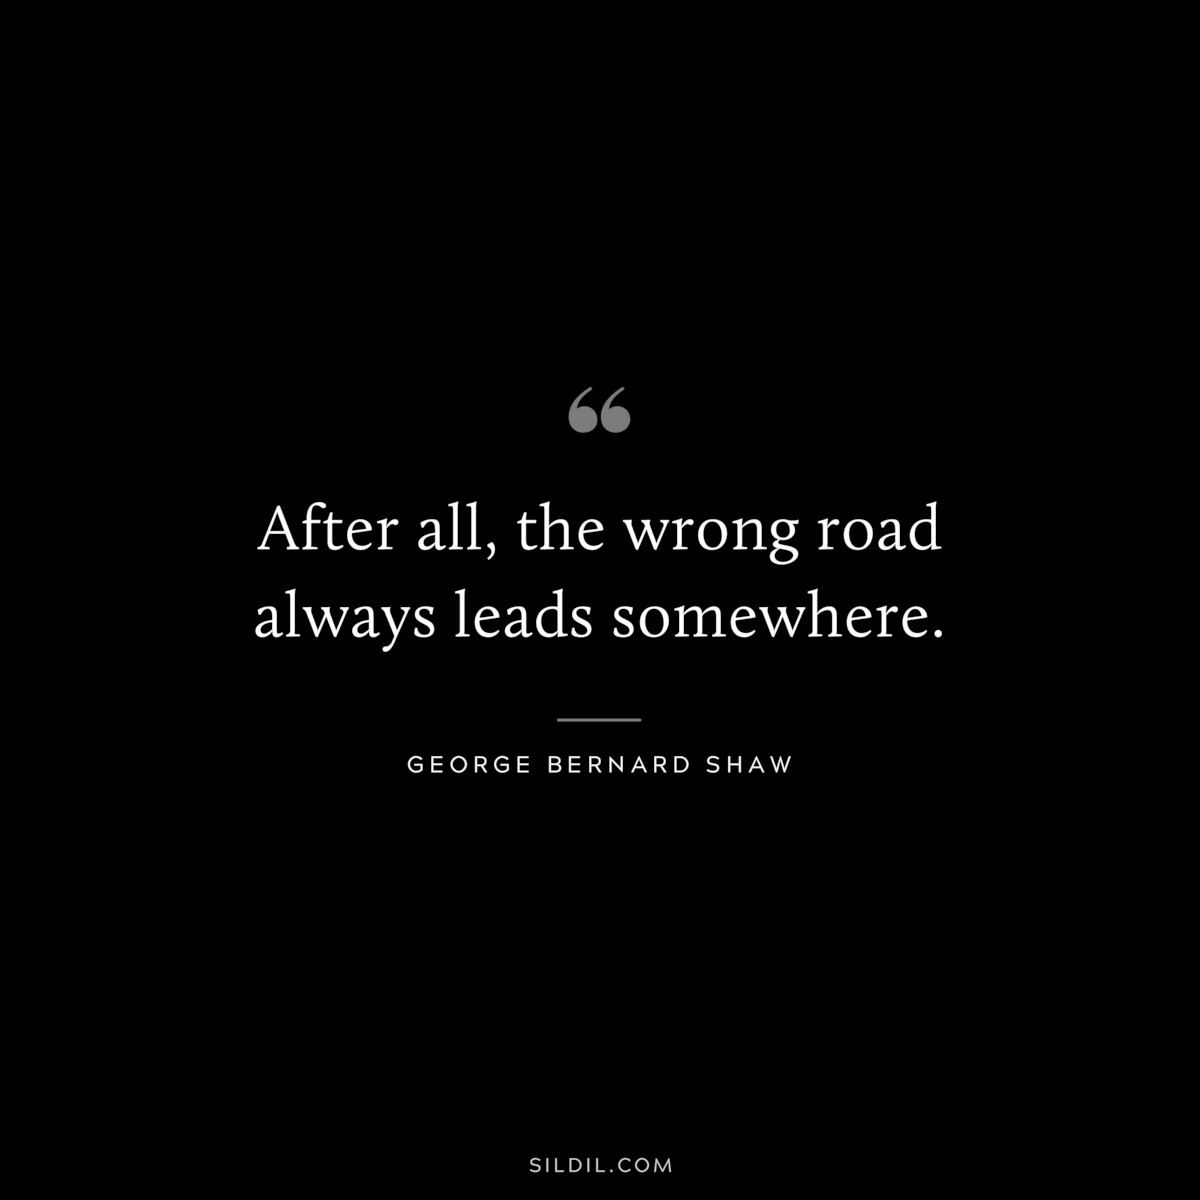 After all, the wrong road always leads somewhere. ― George Bernard Shaw